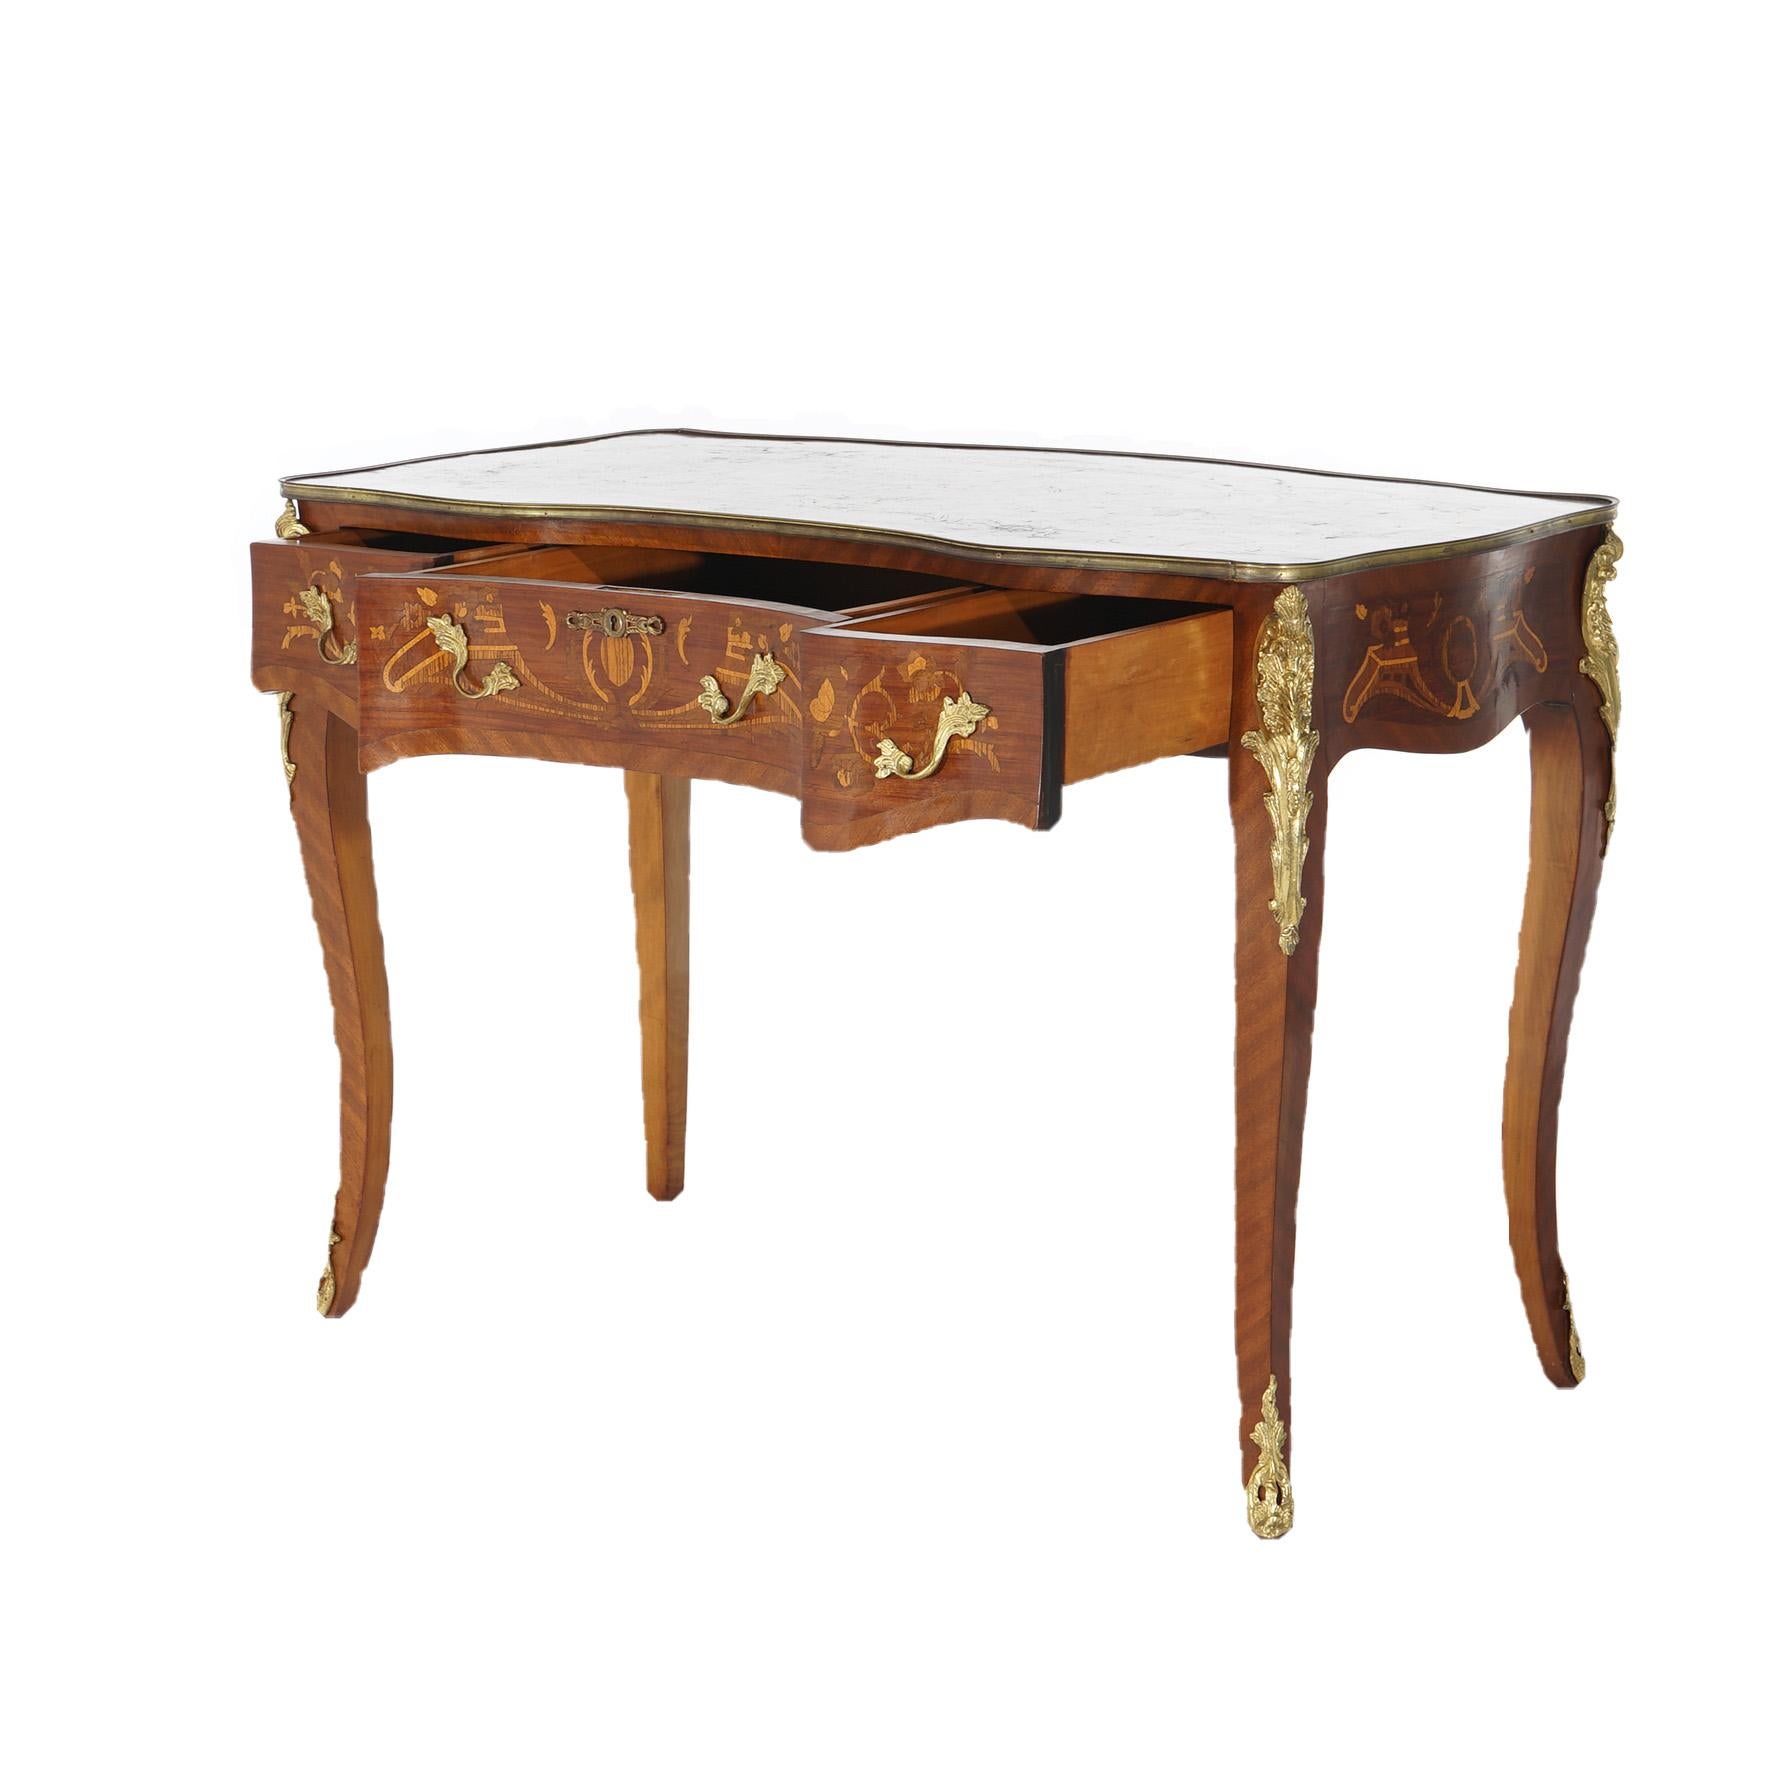 A French Louis XIV style writing desk offers kingwood  and mahogany construction with satinwood scroll and foliate marquetry throughout, three upper drawers, cast ormolu mounts and raised on cabriole legs, 20th century

Measures- 31''H x 43''W x